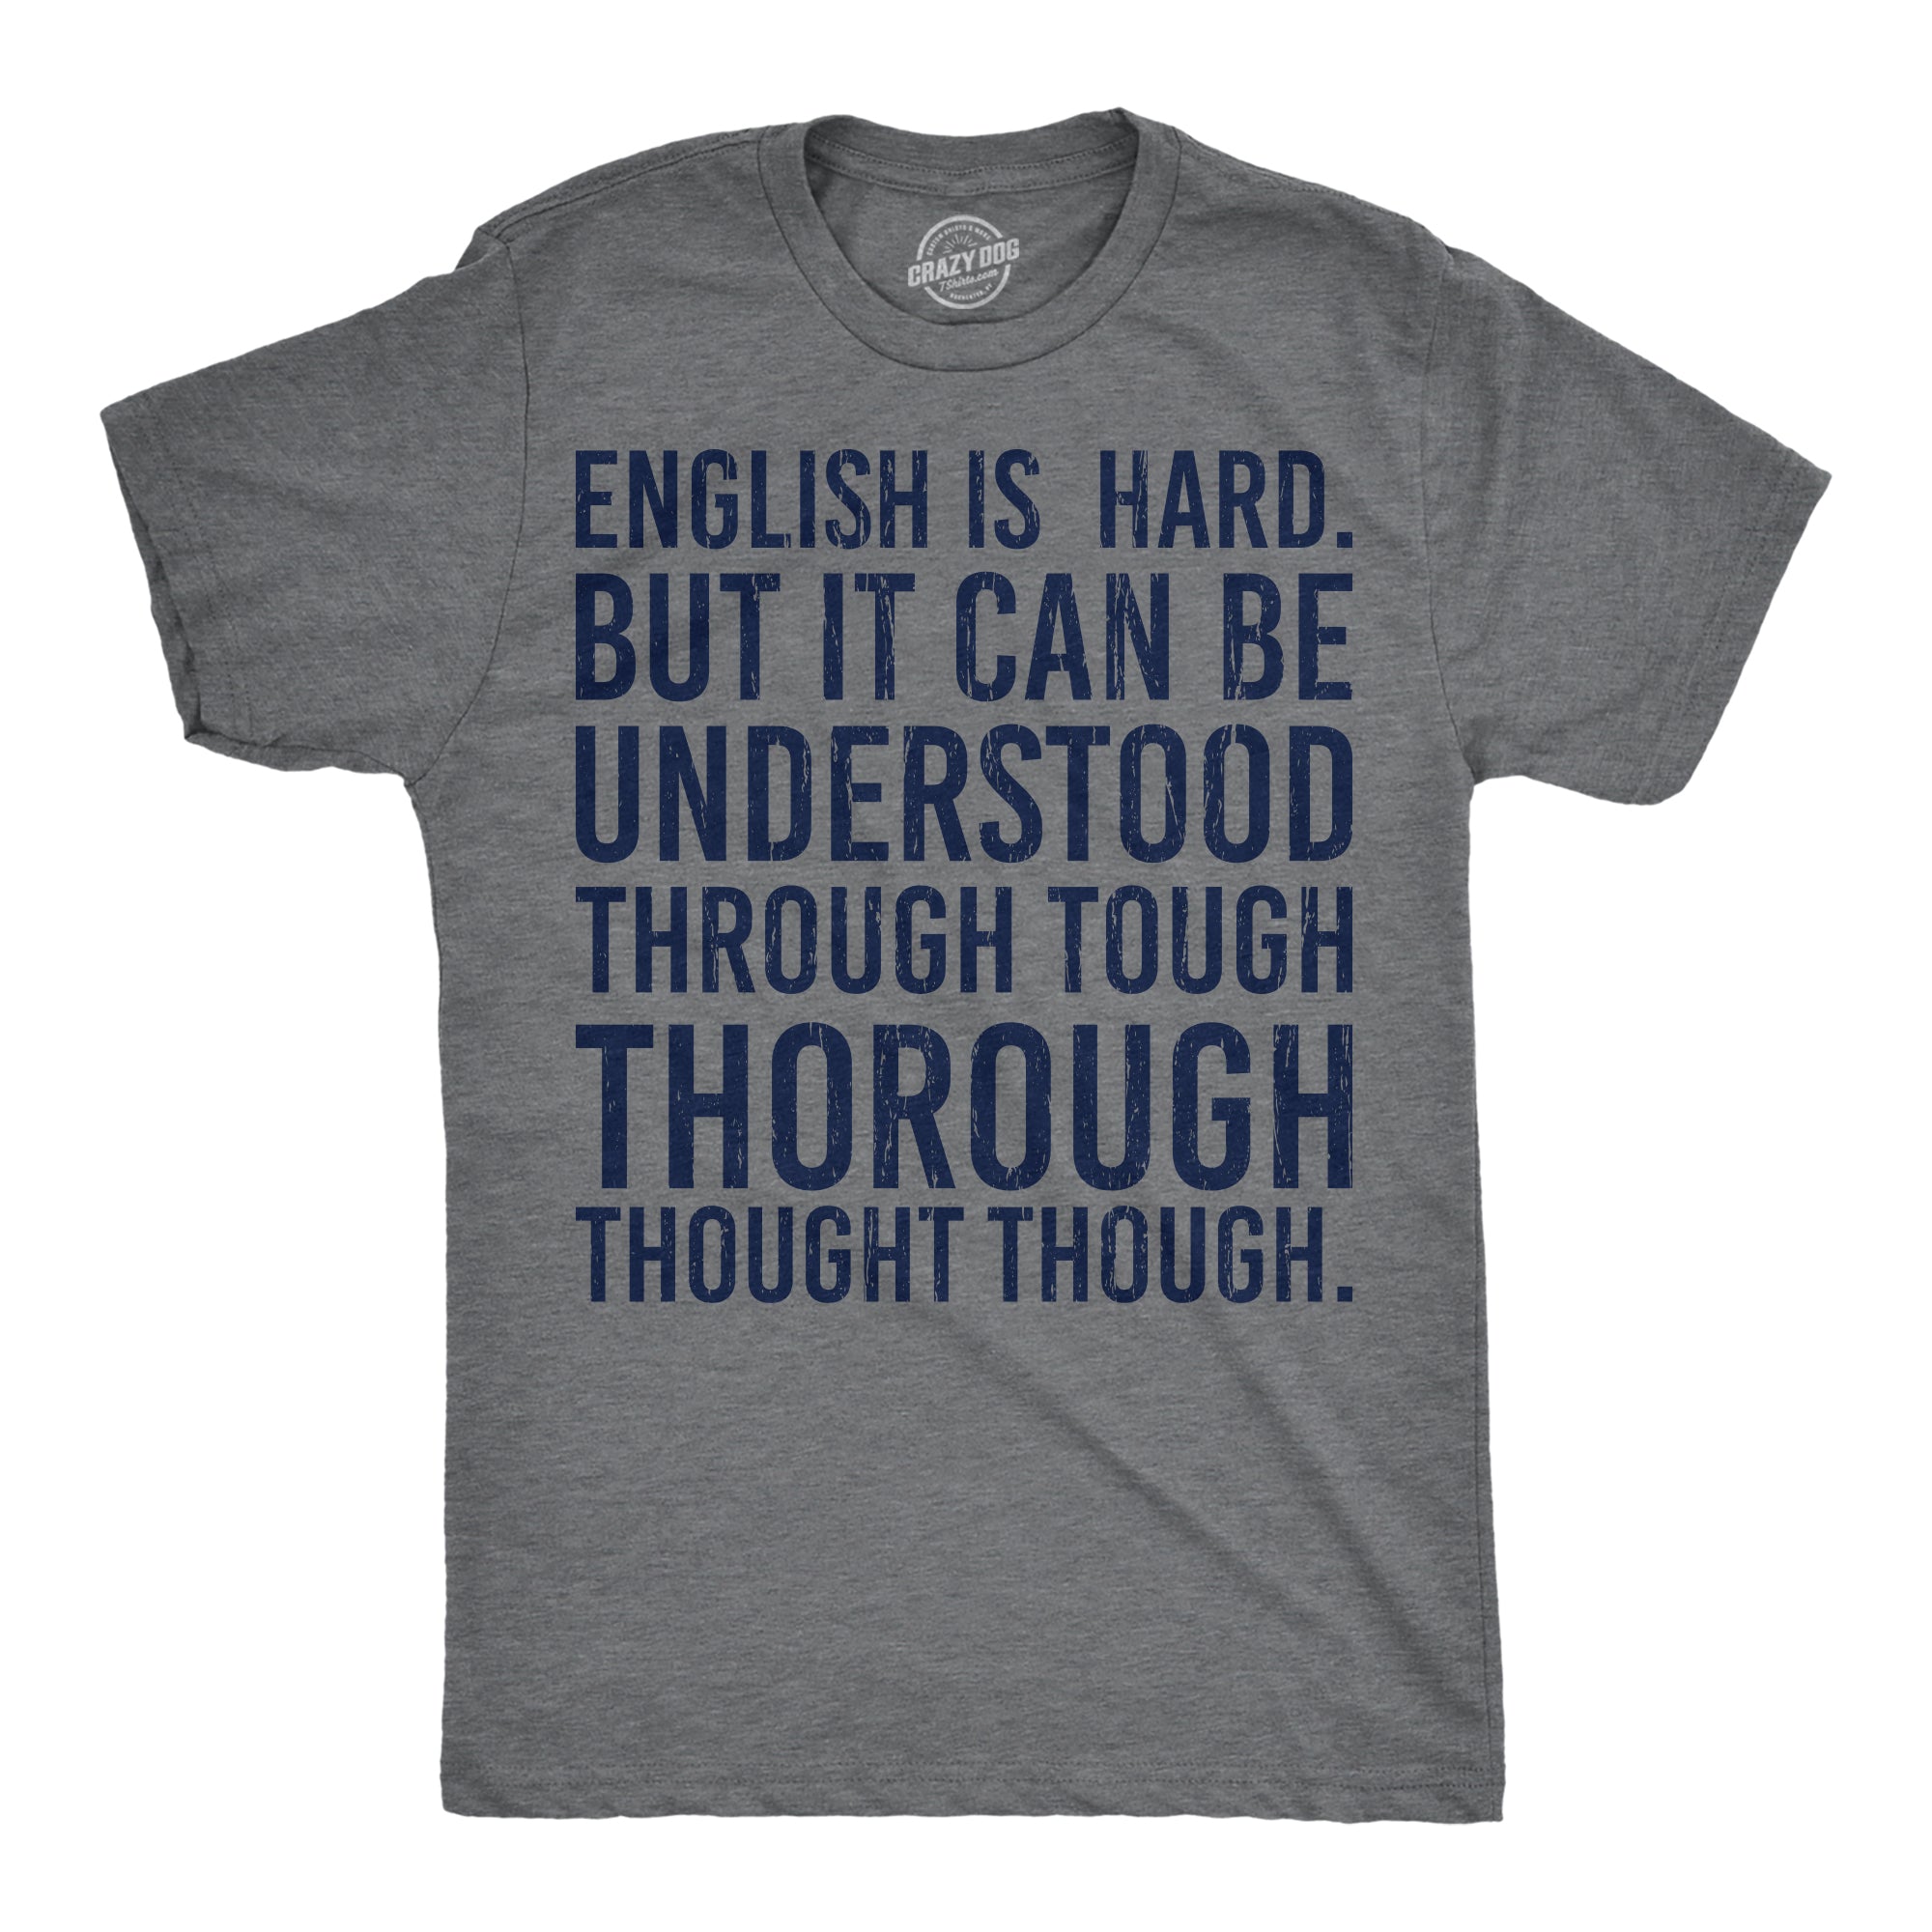 Funny Dark Heather Grey - English Is Hard English Is Hard But It Can Be Understood Through Tough Thorough Thought Though Mens T Shirt Nerdy sarcastic Tee